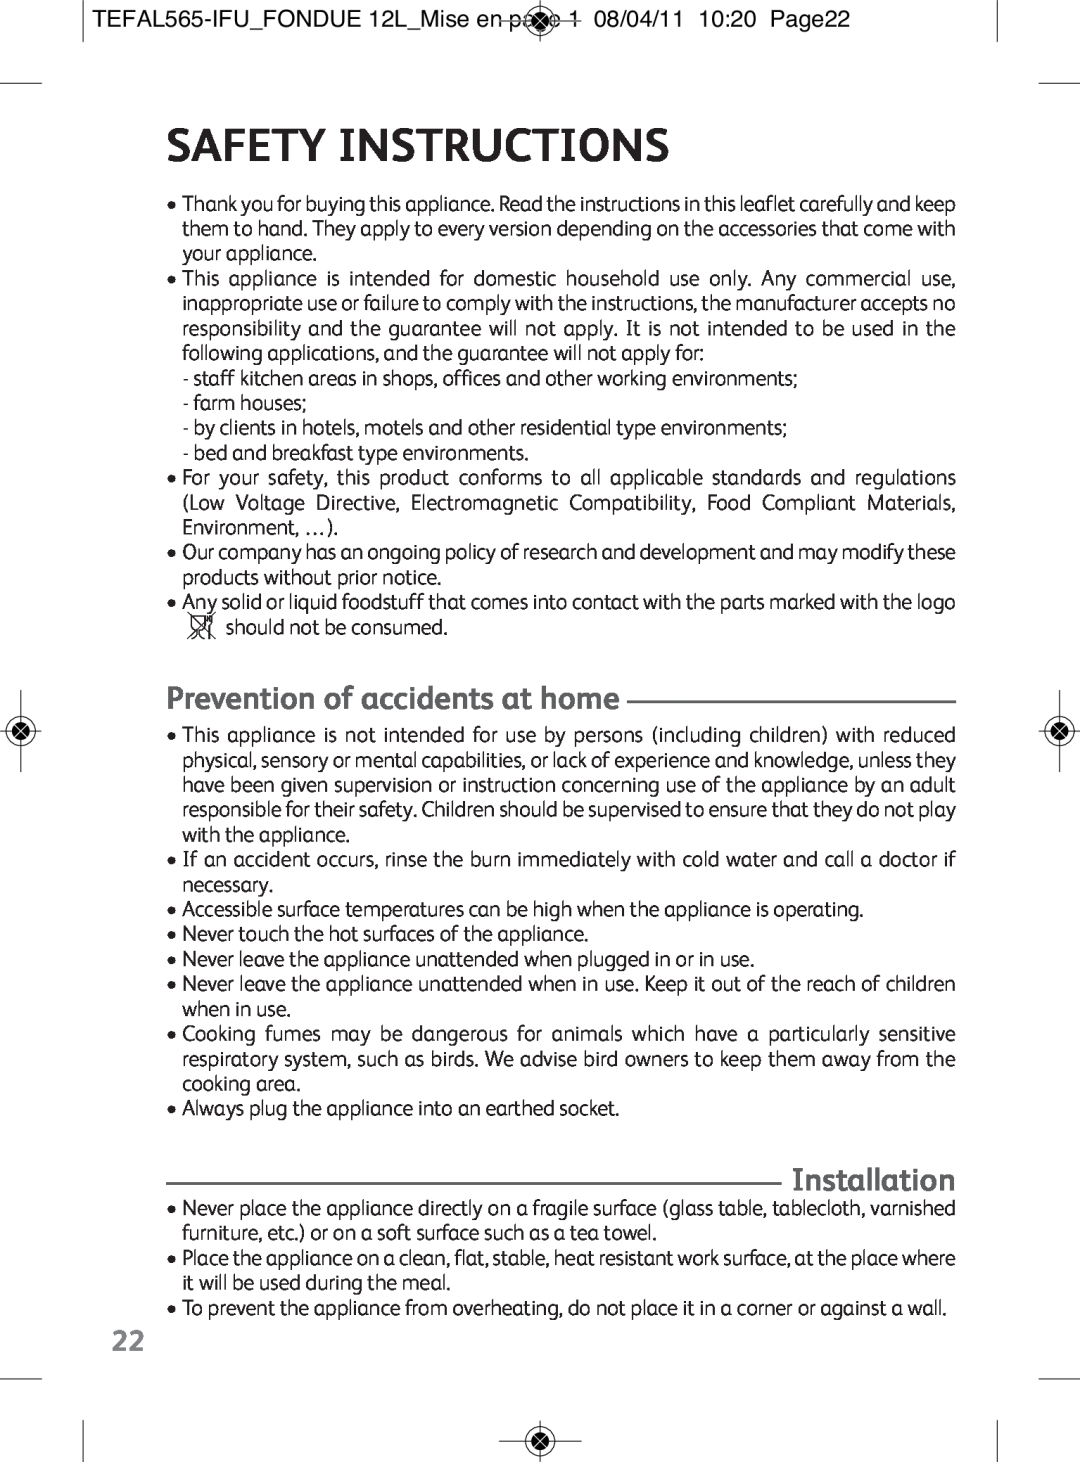 Tefal EF255012, EF255026, EF255014 manual Safety Instructions, Prevention of accidents at home, Installation 